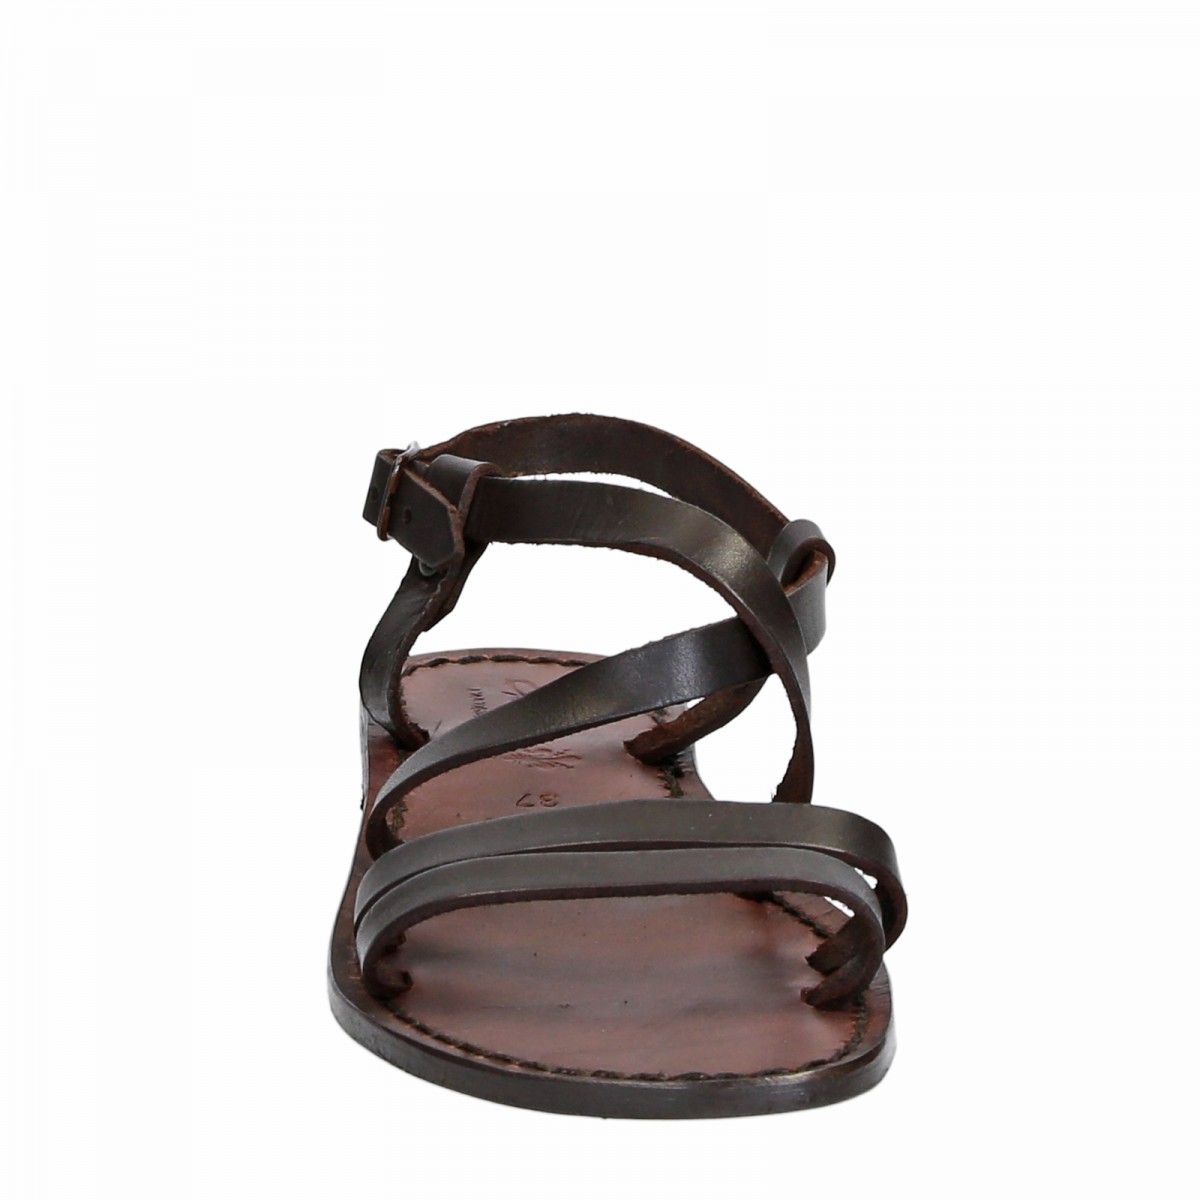 Women's brown leather sandals hand made in Italy | Gianluca - The ...